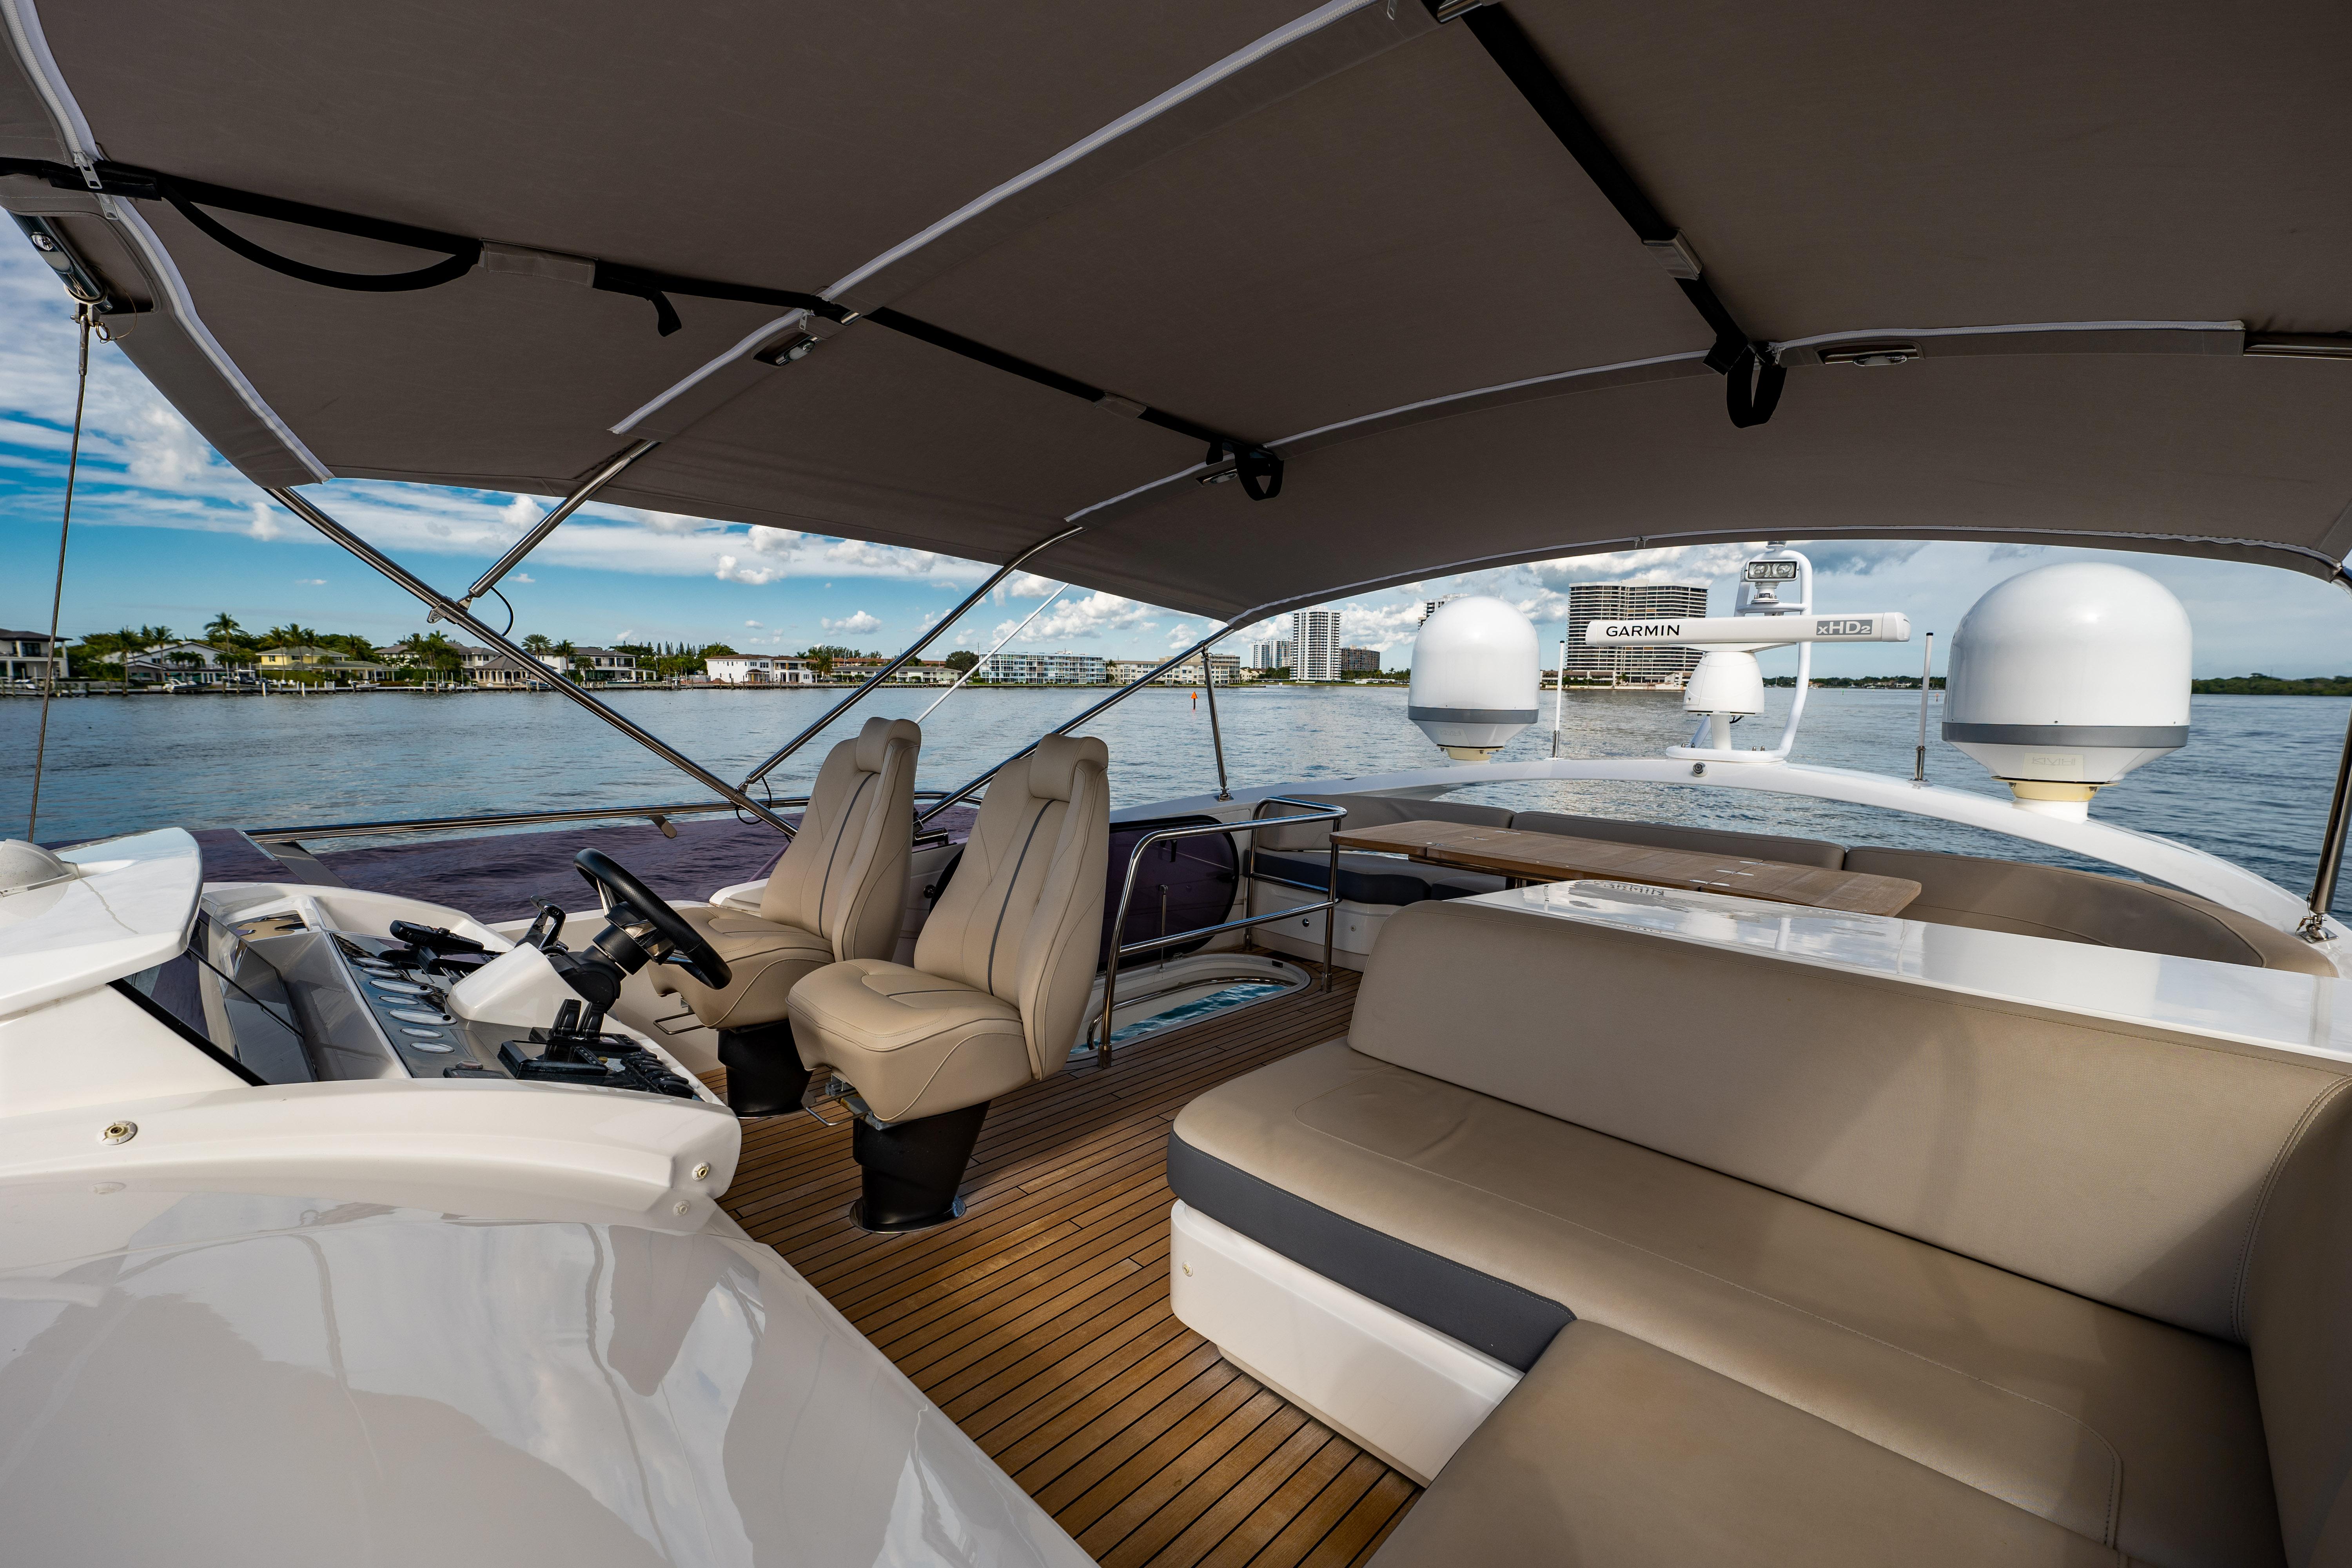 Princess S65 - Exterior helm photo on water